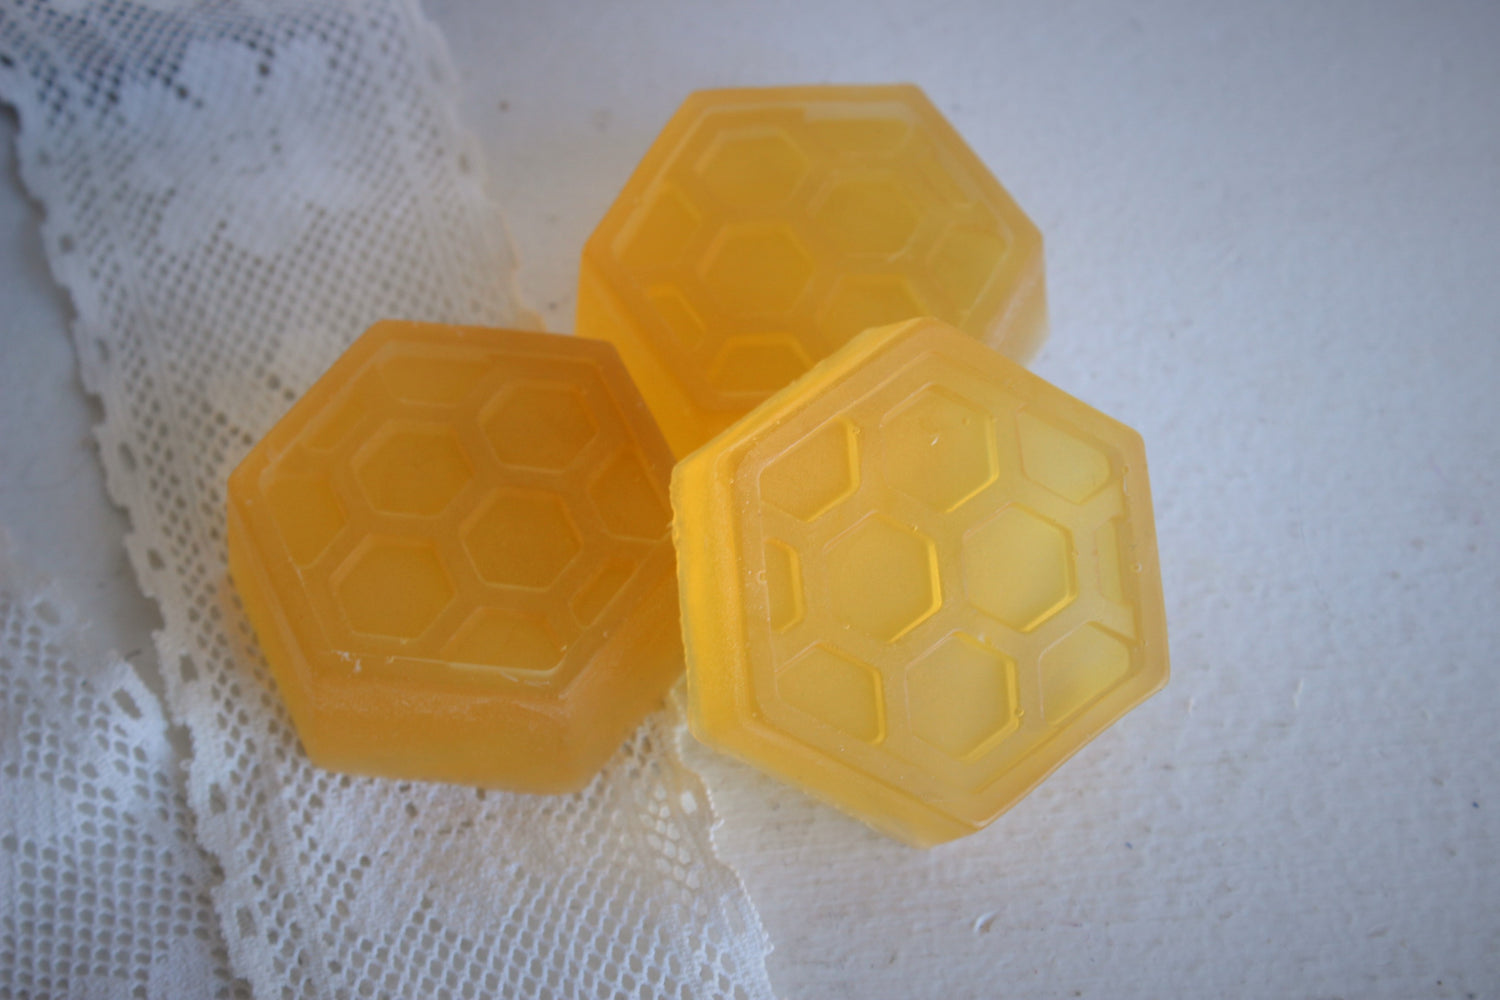 "The Bees Knees" Handmade Honey Glycerin Soap Scented with Honeysuckle